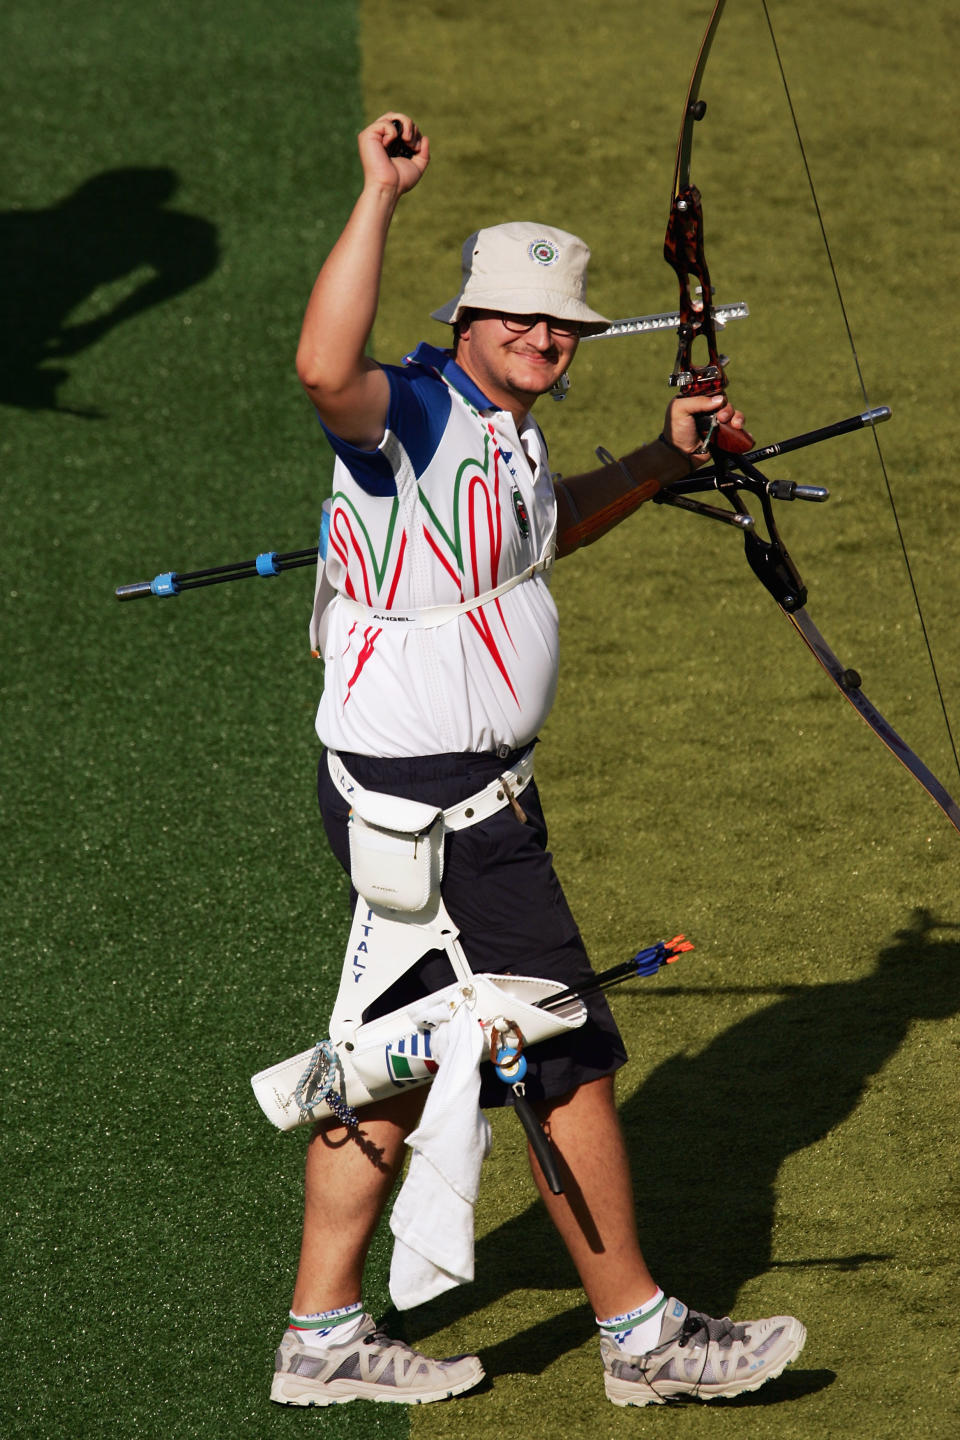 ATHENS - AUGUST 19: Marco Galiazzo of Italy celebrates his victory against Laurence Godfrey in the men's individual semifinal match on August 19, 2004 during the Athens 2004 Summer Olympic Games at Panathinaiko Stadium in Athens, Greece. (Photo by Nick Laham/Getty Images)